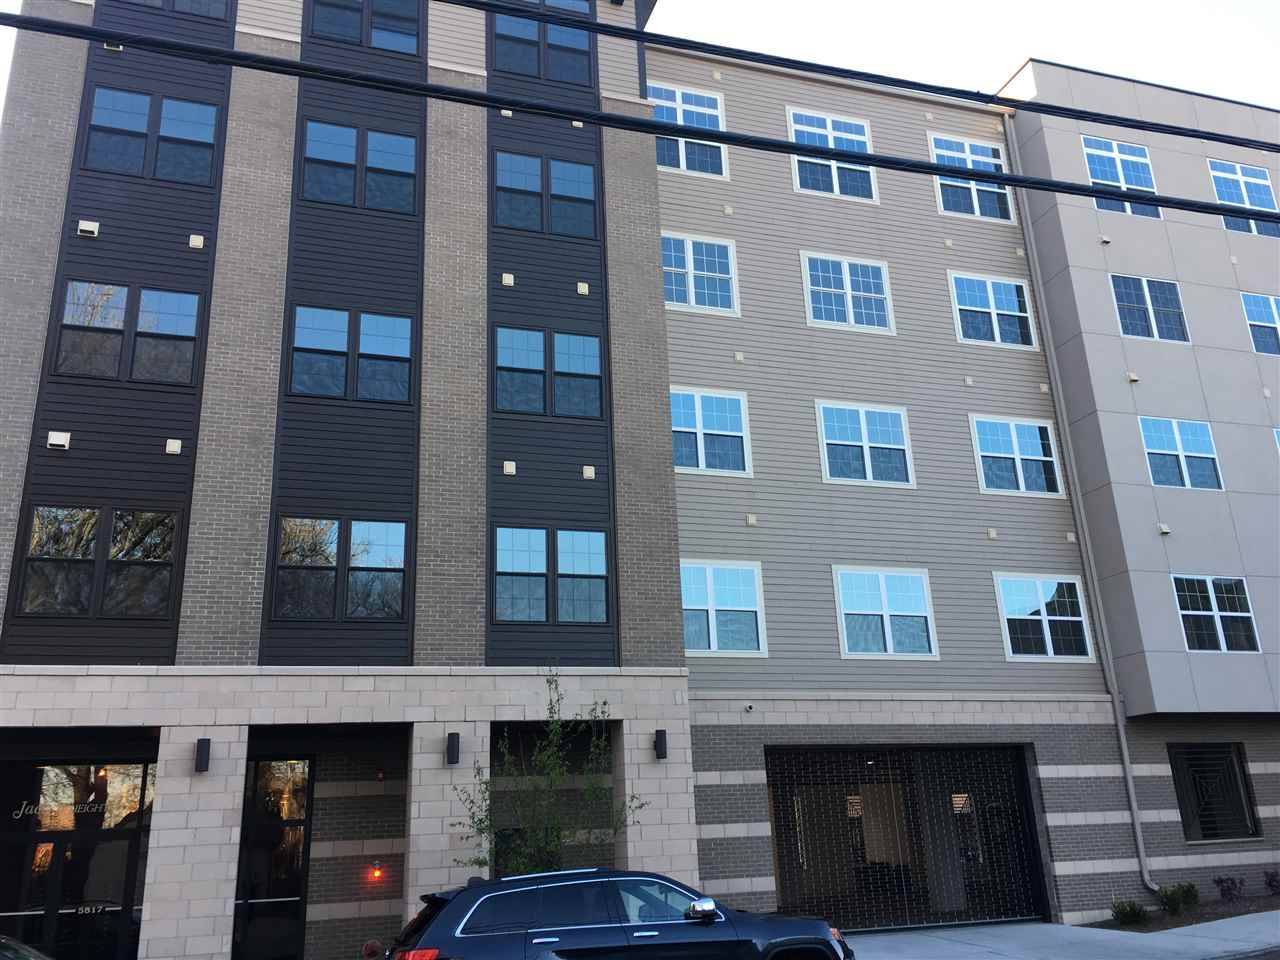 Large 3 bedroom in a triple green building - 3 BR New Jersey